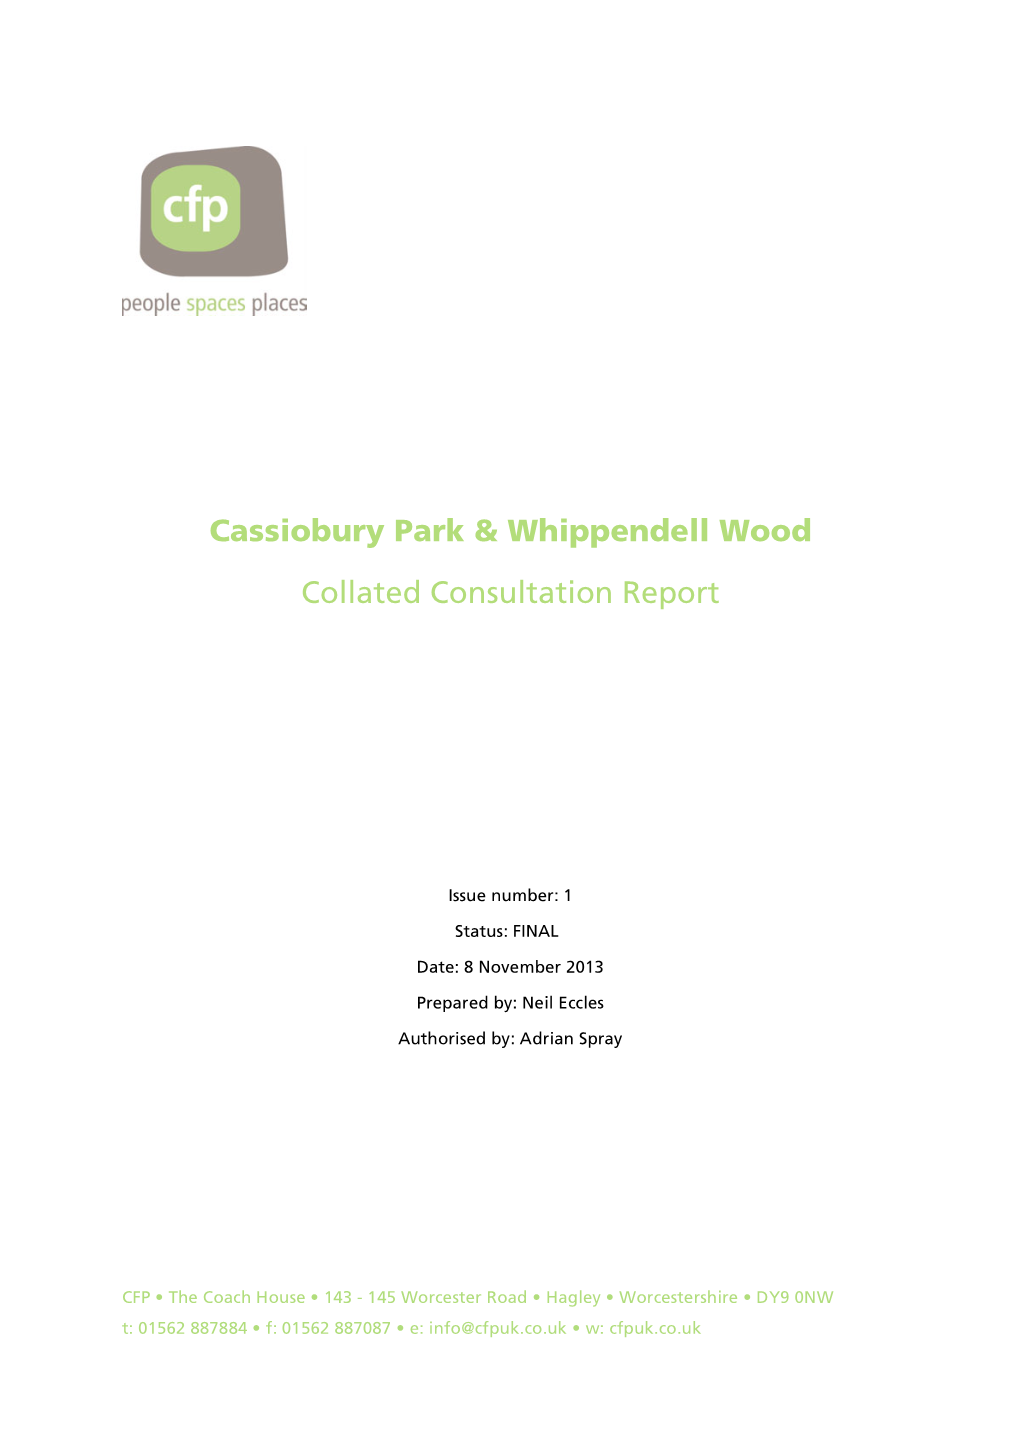 Cassiobury Park & Whippendell Wood Collated Consultation Report